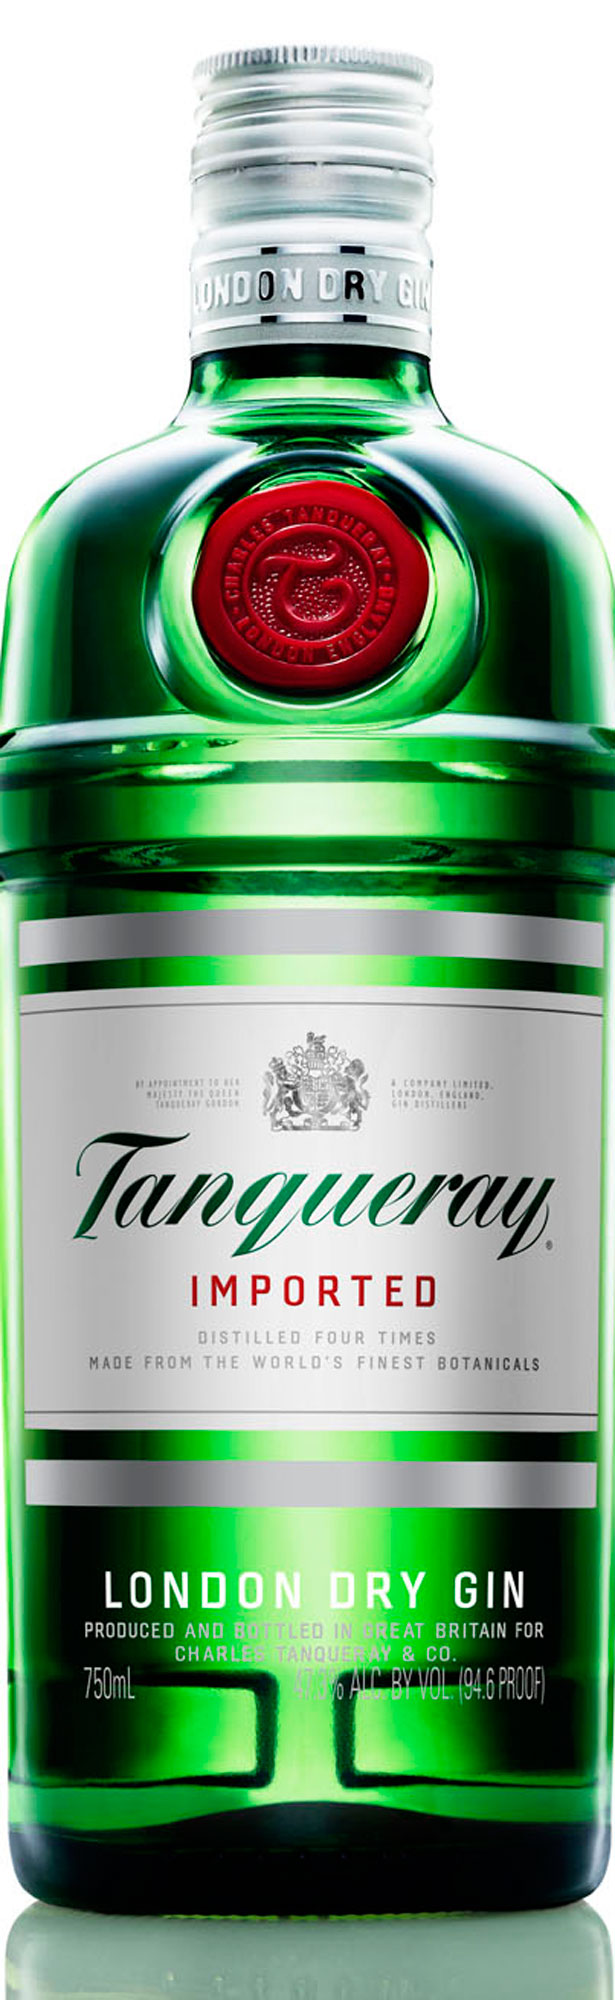 TANQUERAY_BOTTLE